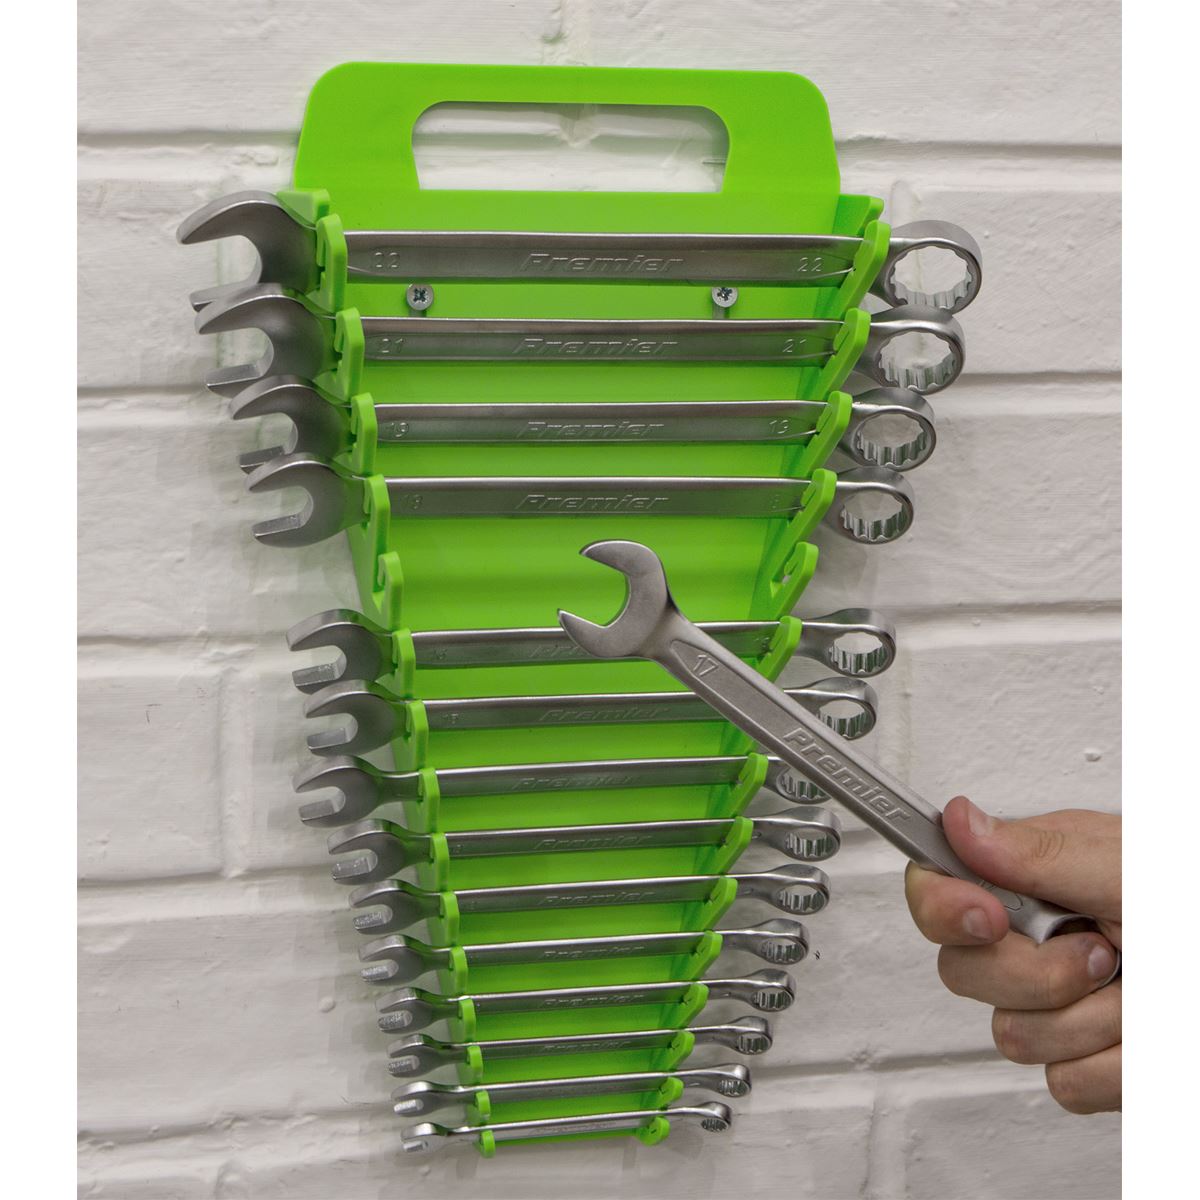 Sealey Premier High Visibility Green Spanner Rack 15 Capacity Hanging Toolbox